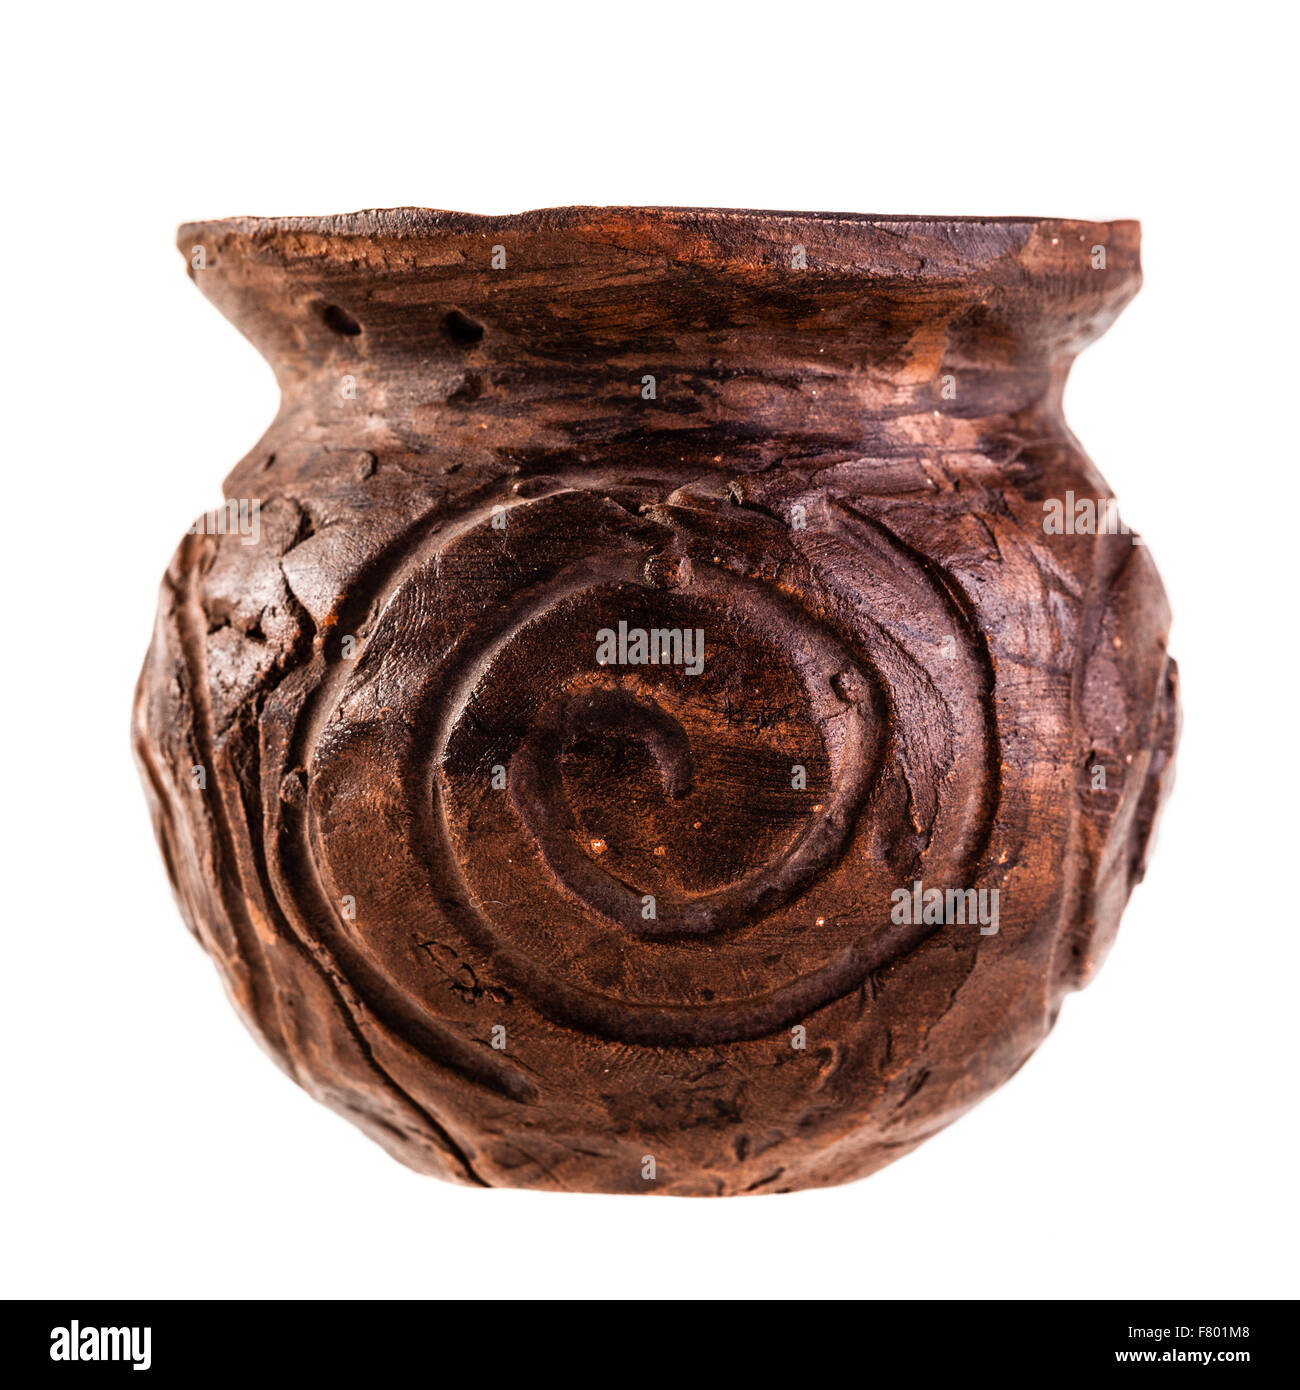 an ancient apulian Olla, a roman style vase, isolated over a white background Stock Photo